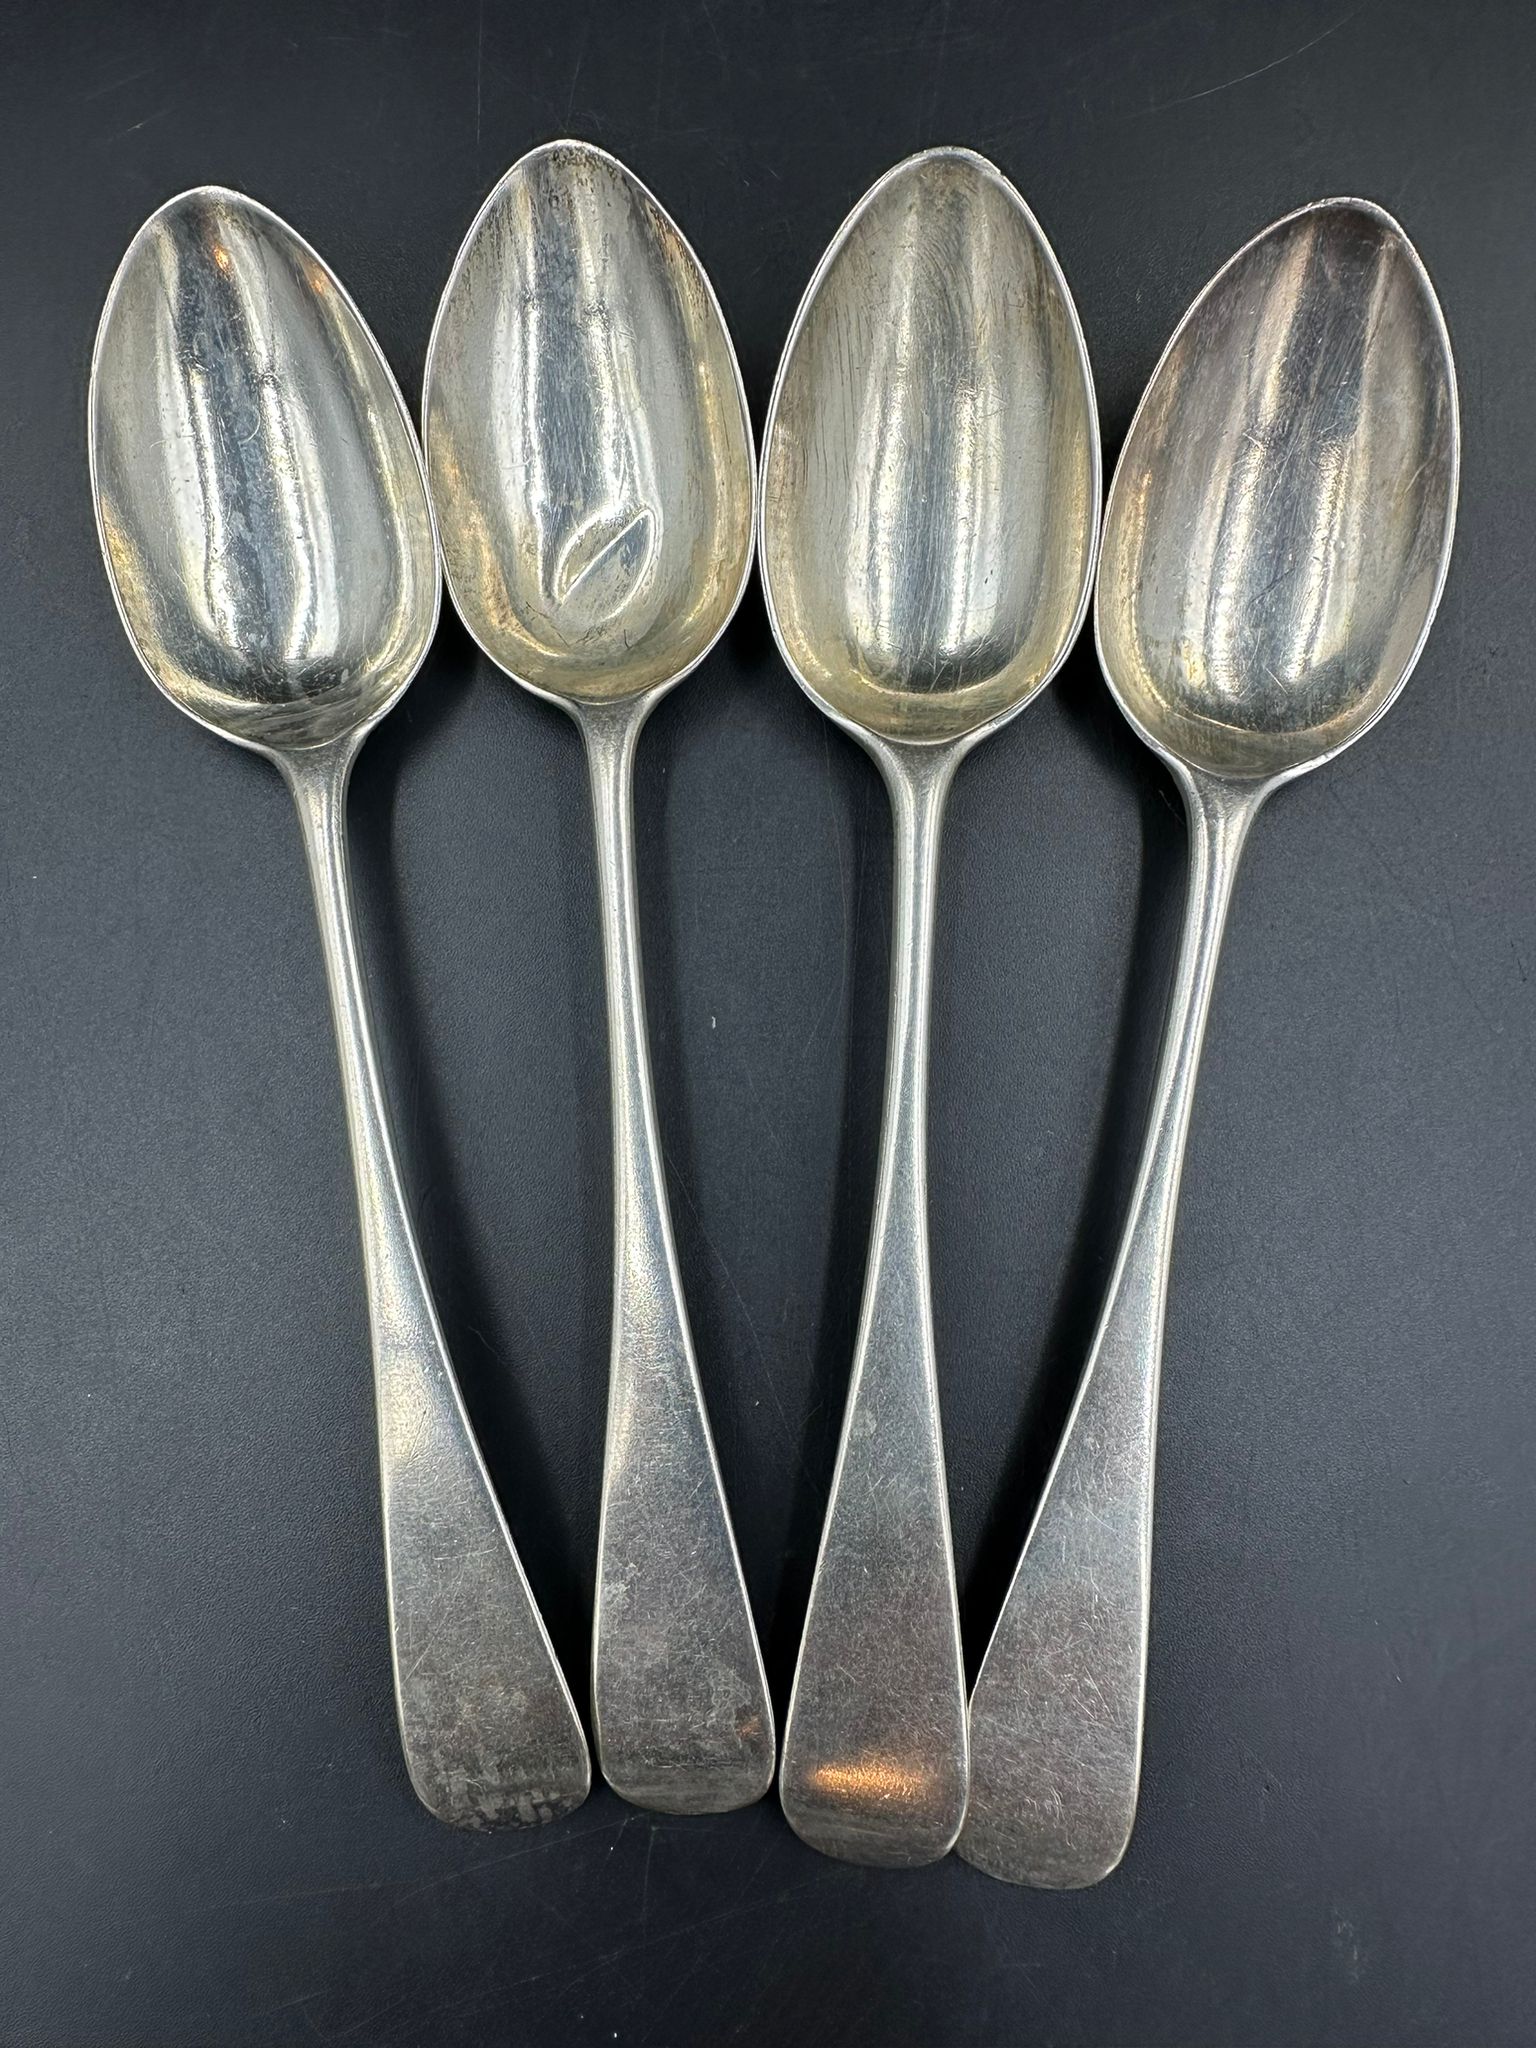 Four Victorian silver teaspoons,hallmarked for London 1883 by Holland, Son & Slater - Image 3 of 4